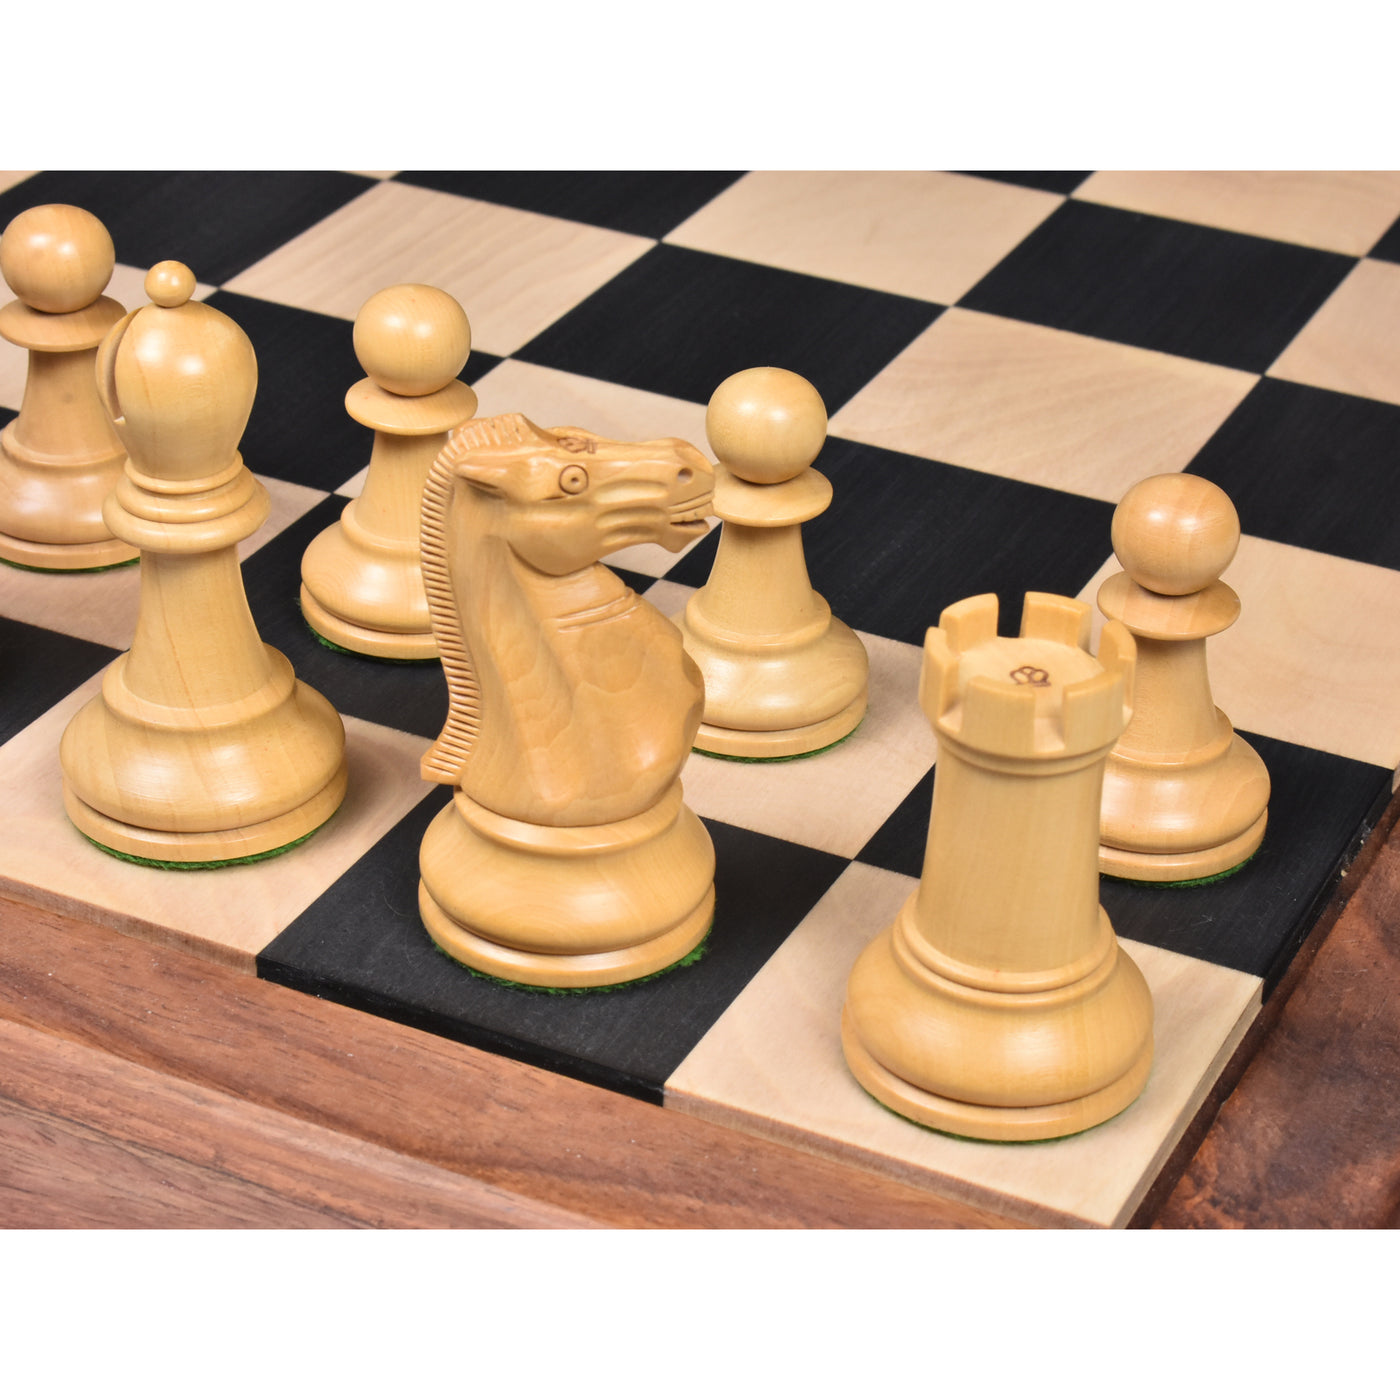 3.9" Lessing Staunton Chess Pieces only Set- Natural Ebony Wood -Triple Weighted